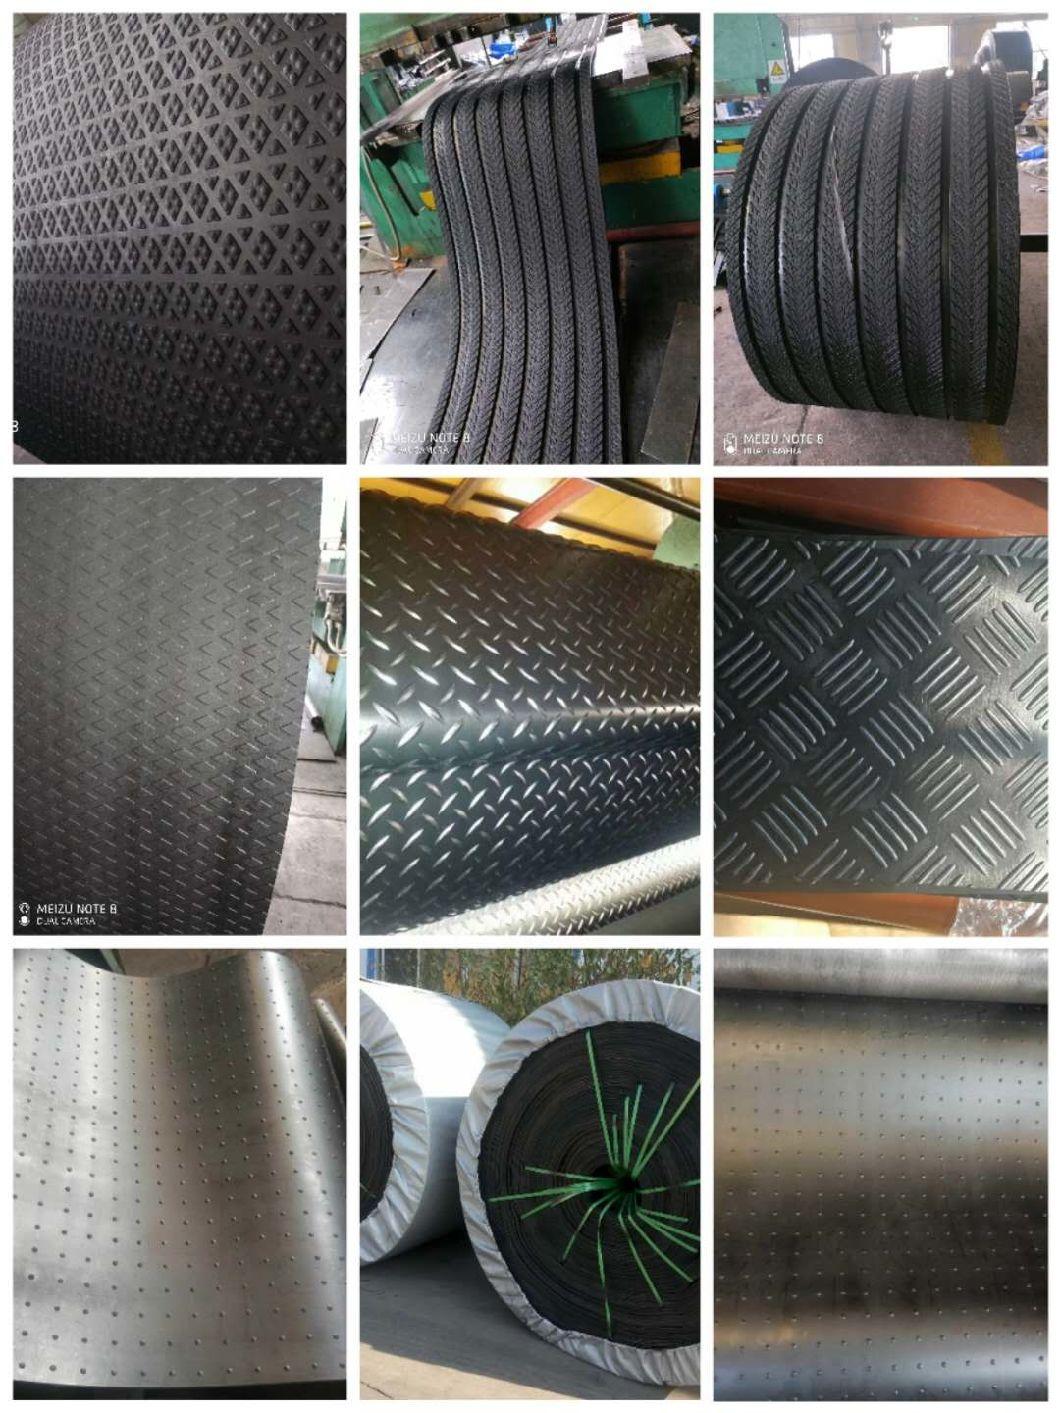 C25 Good Tensile Black Rubber Conveyor Belting with Patterns for Cement Farm Use